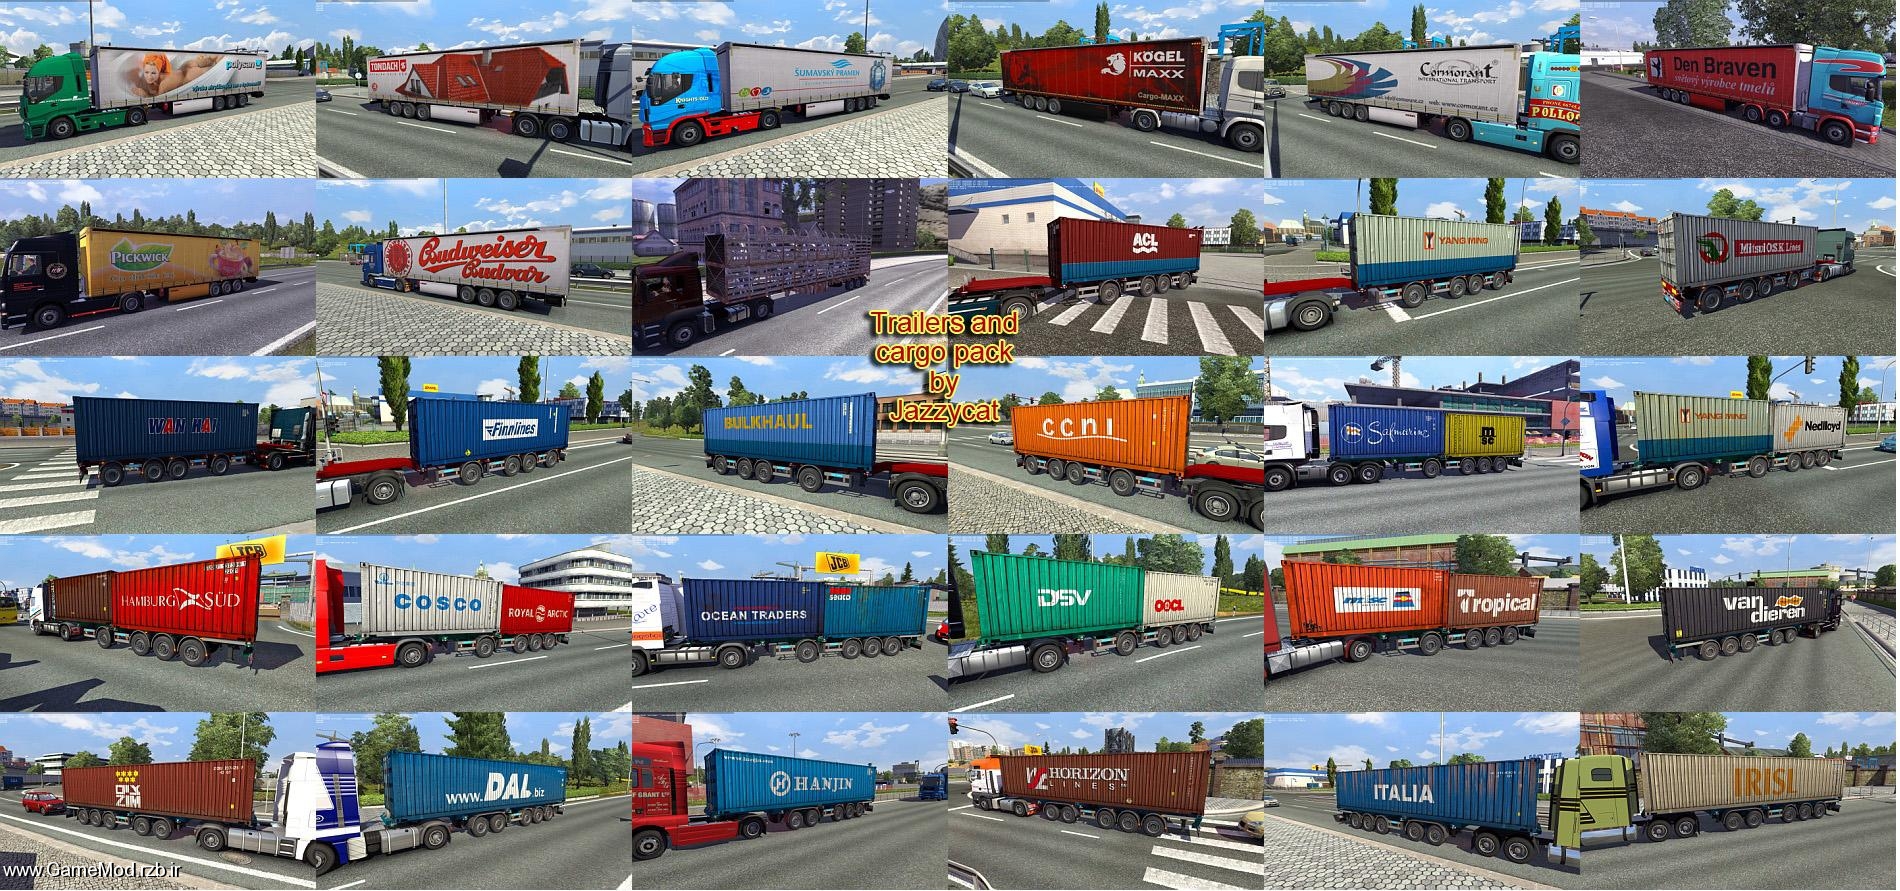 trailers-and-cargo-pack-by-jazzycat-v2-6_10.jpg (1900×891)